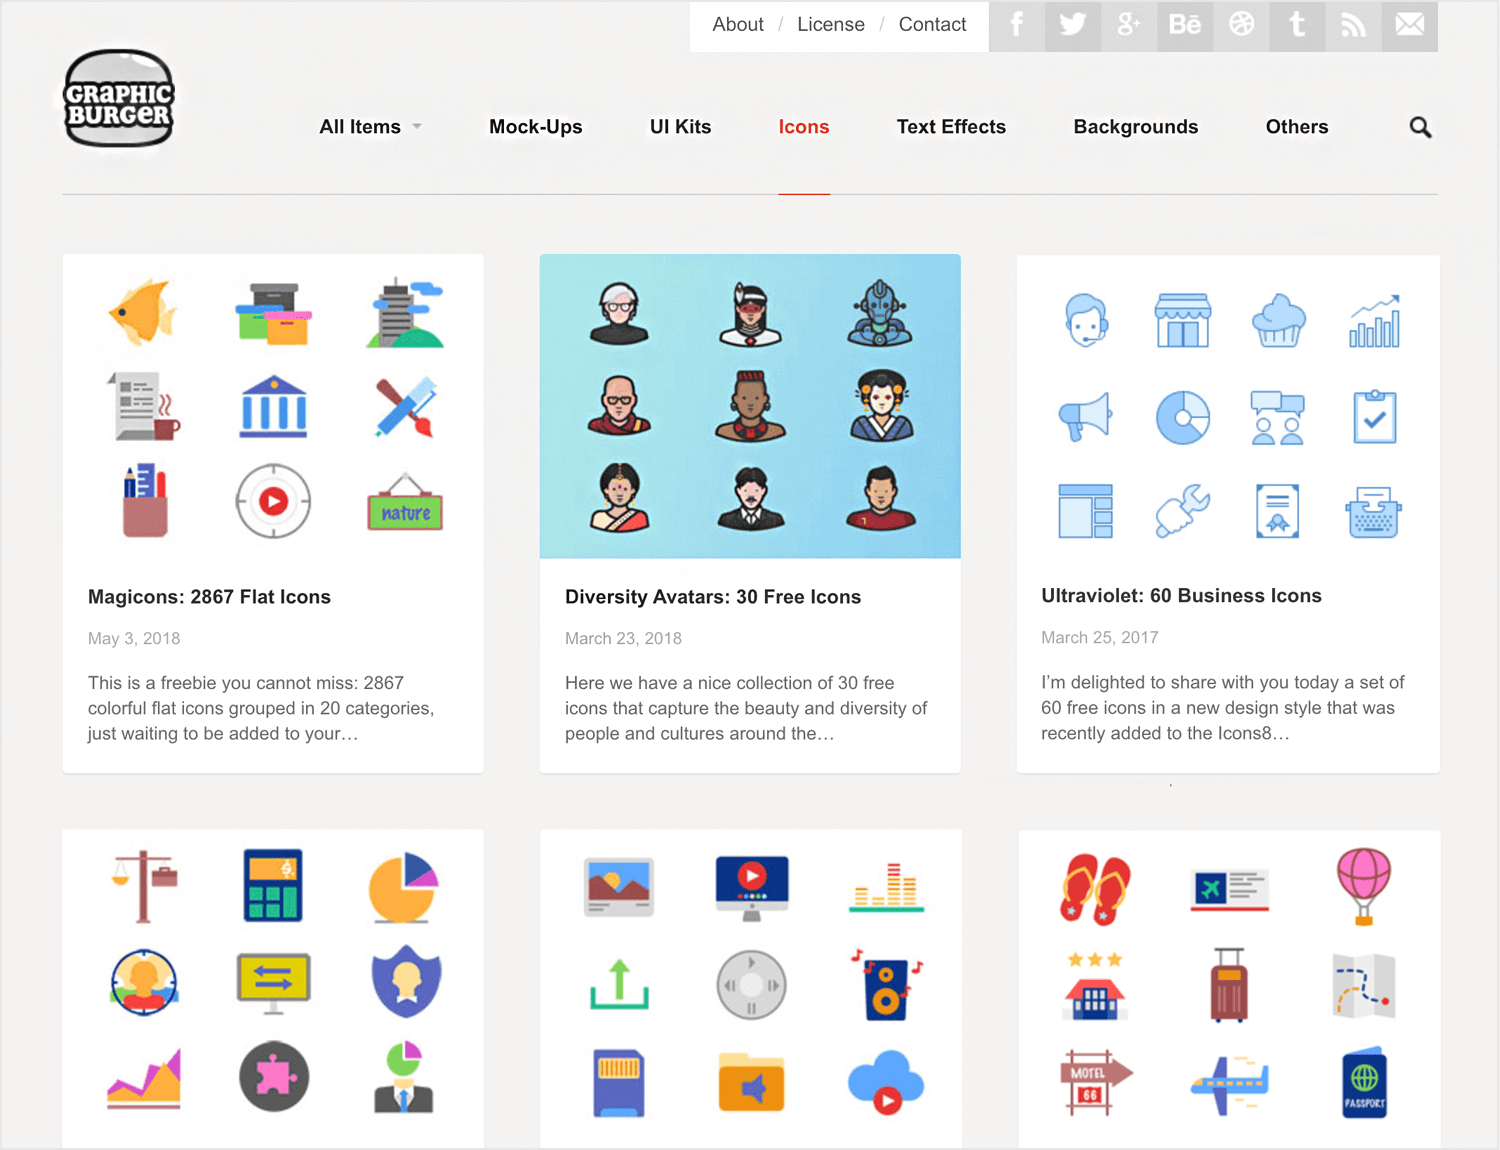 graphicburger as a place for free design resources